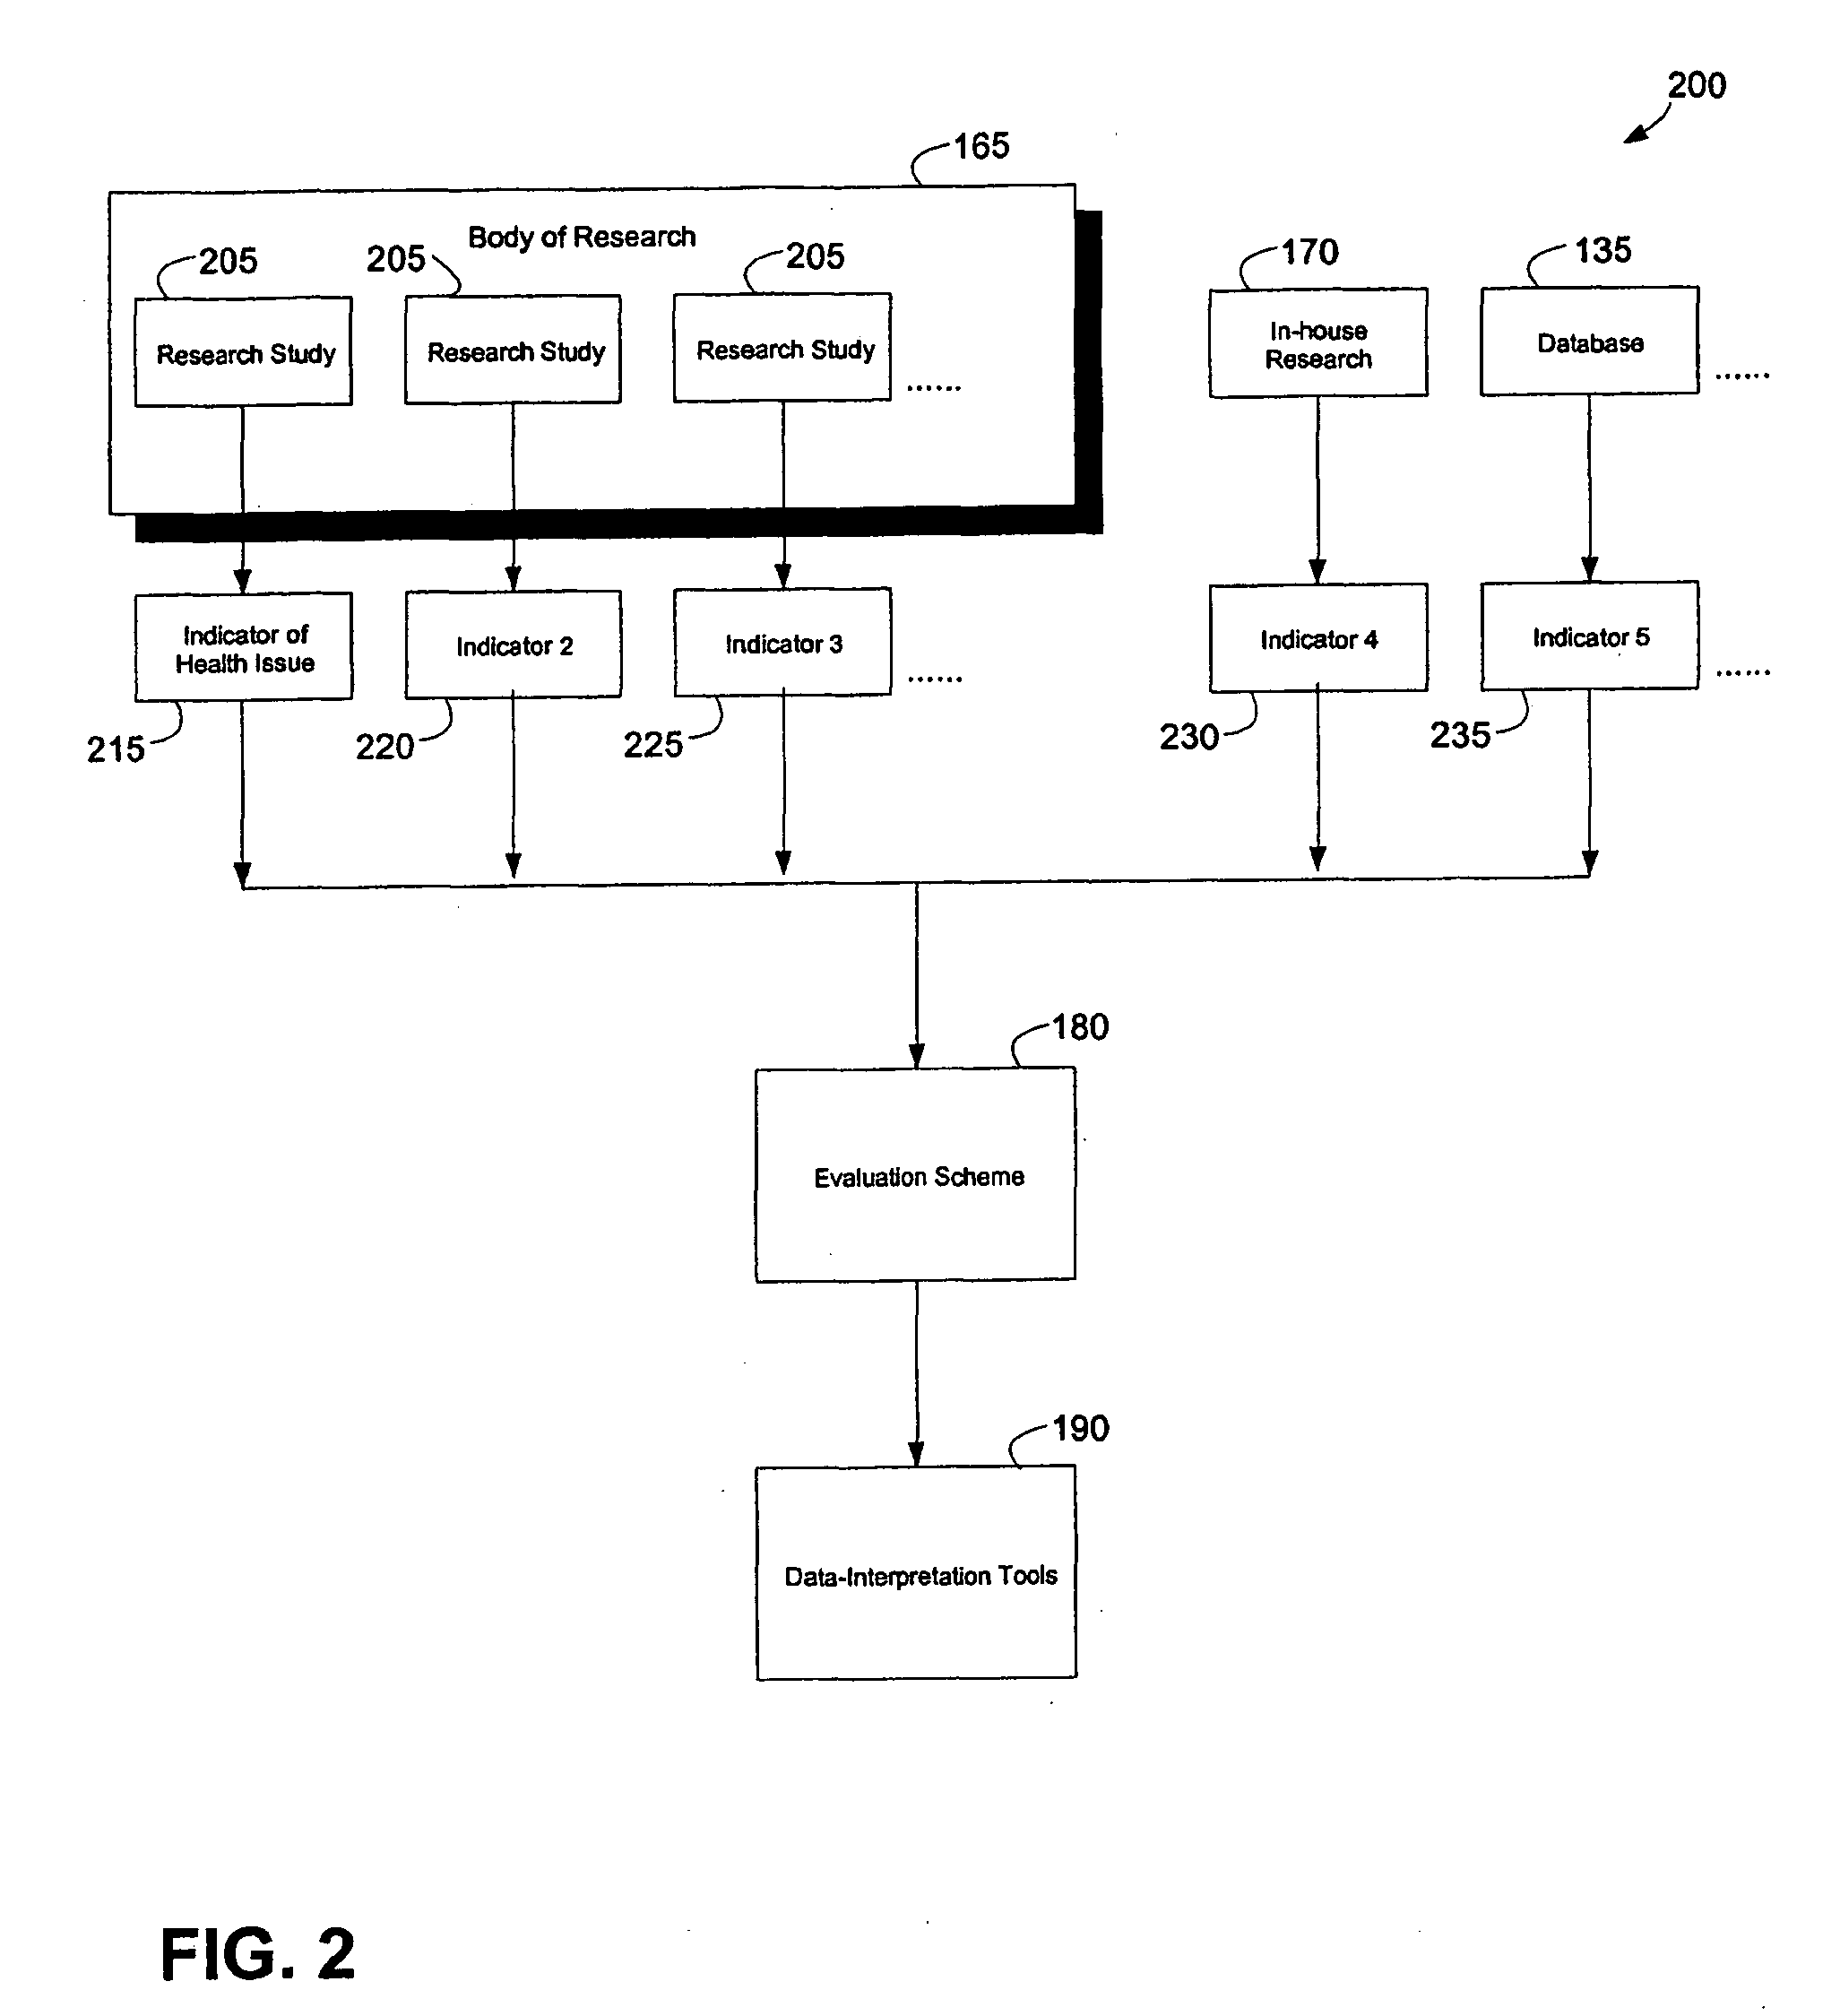 Associated systems and methods for managing biological data and providing data interpretation tools